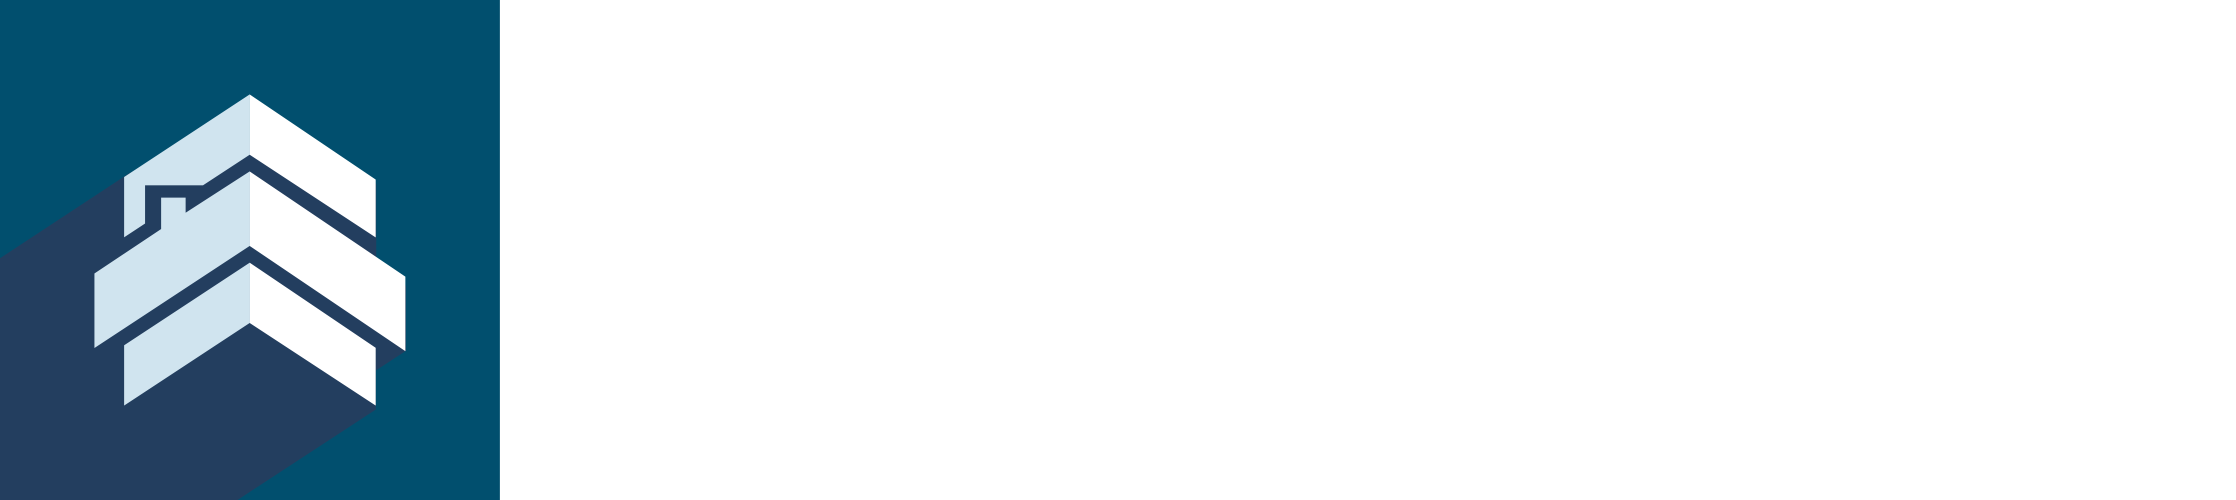 Community Housing Affordability Collective